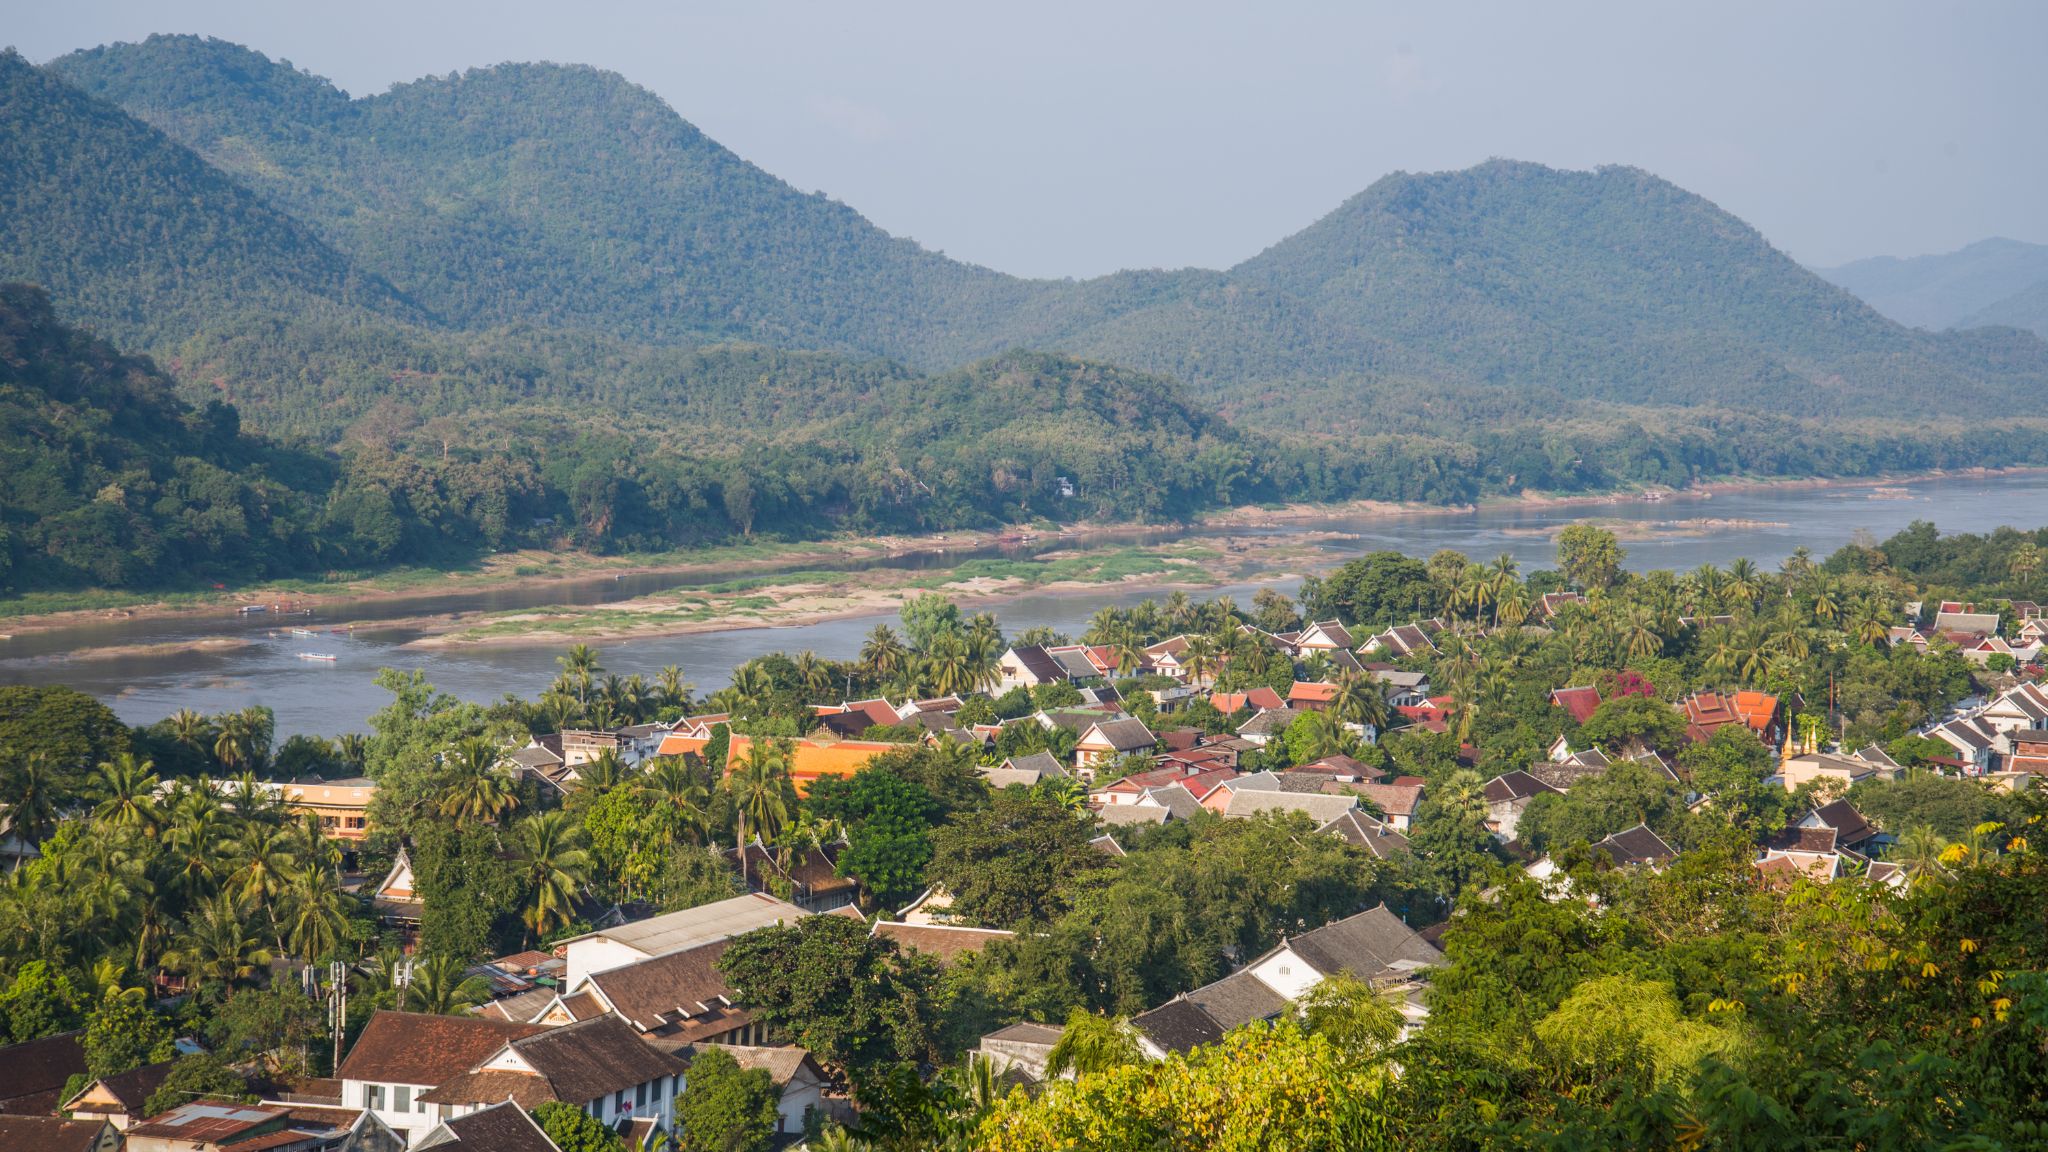 Day 1 Stroll Through The Streets Of Luang Prabang